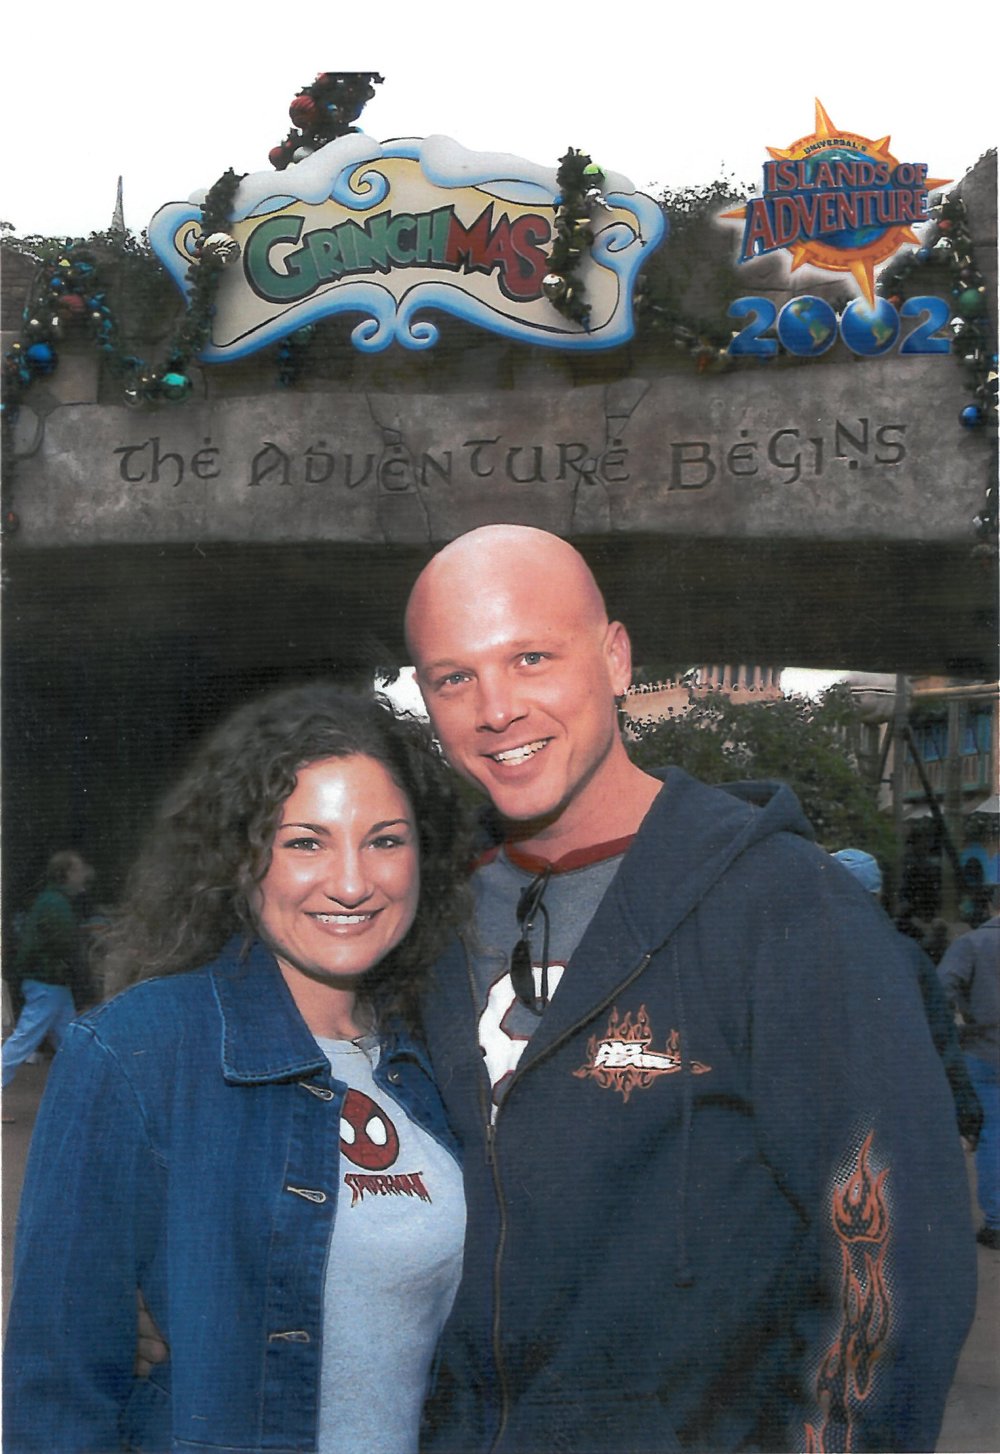 Anna and Nathanael at the entrance to Islands of Adventure, Universal Orlando 2002